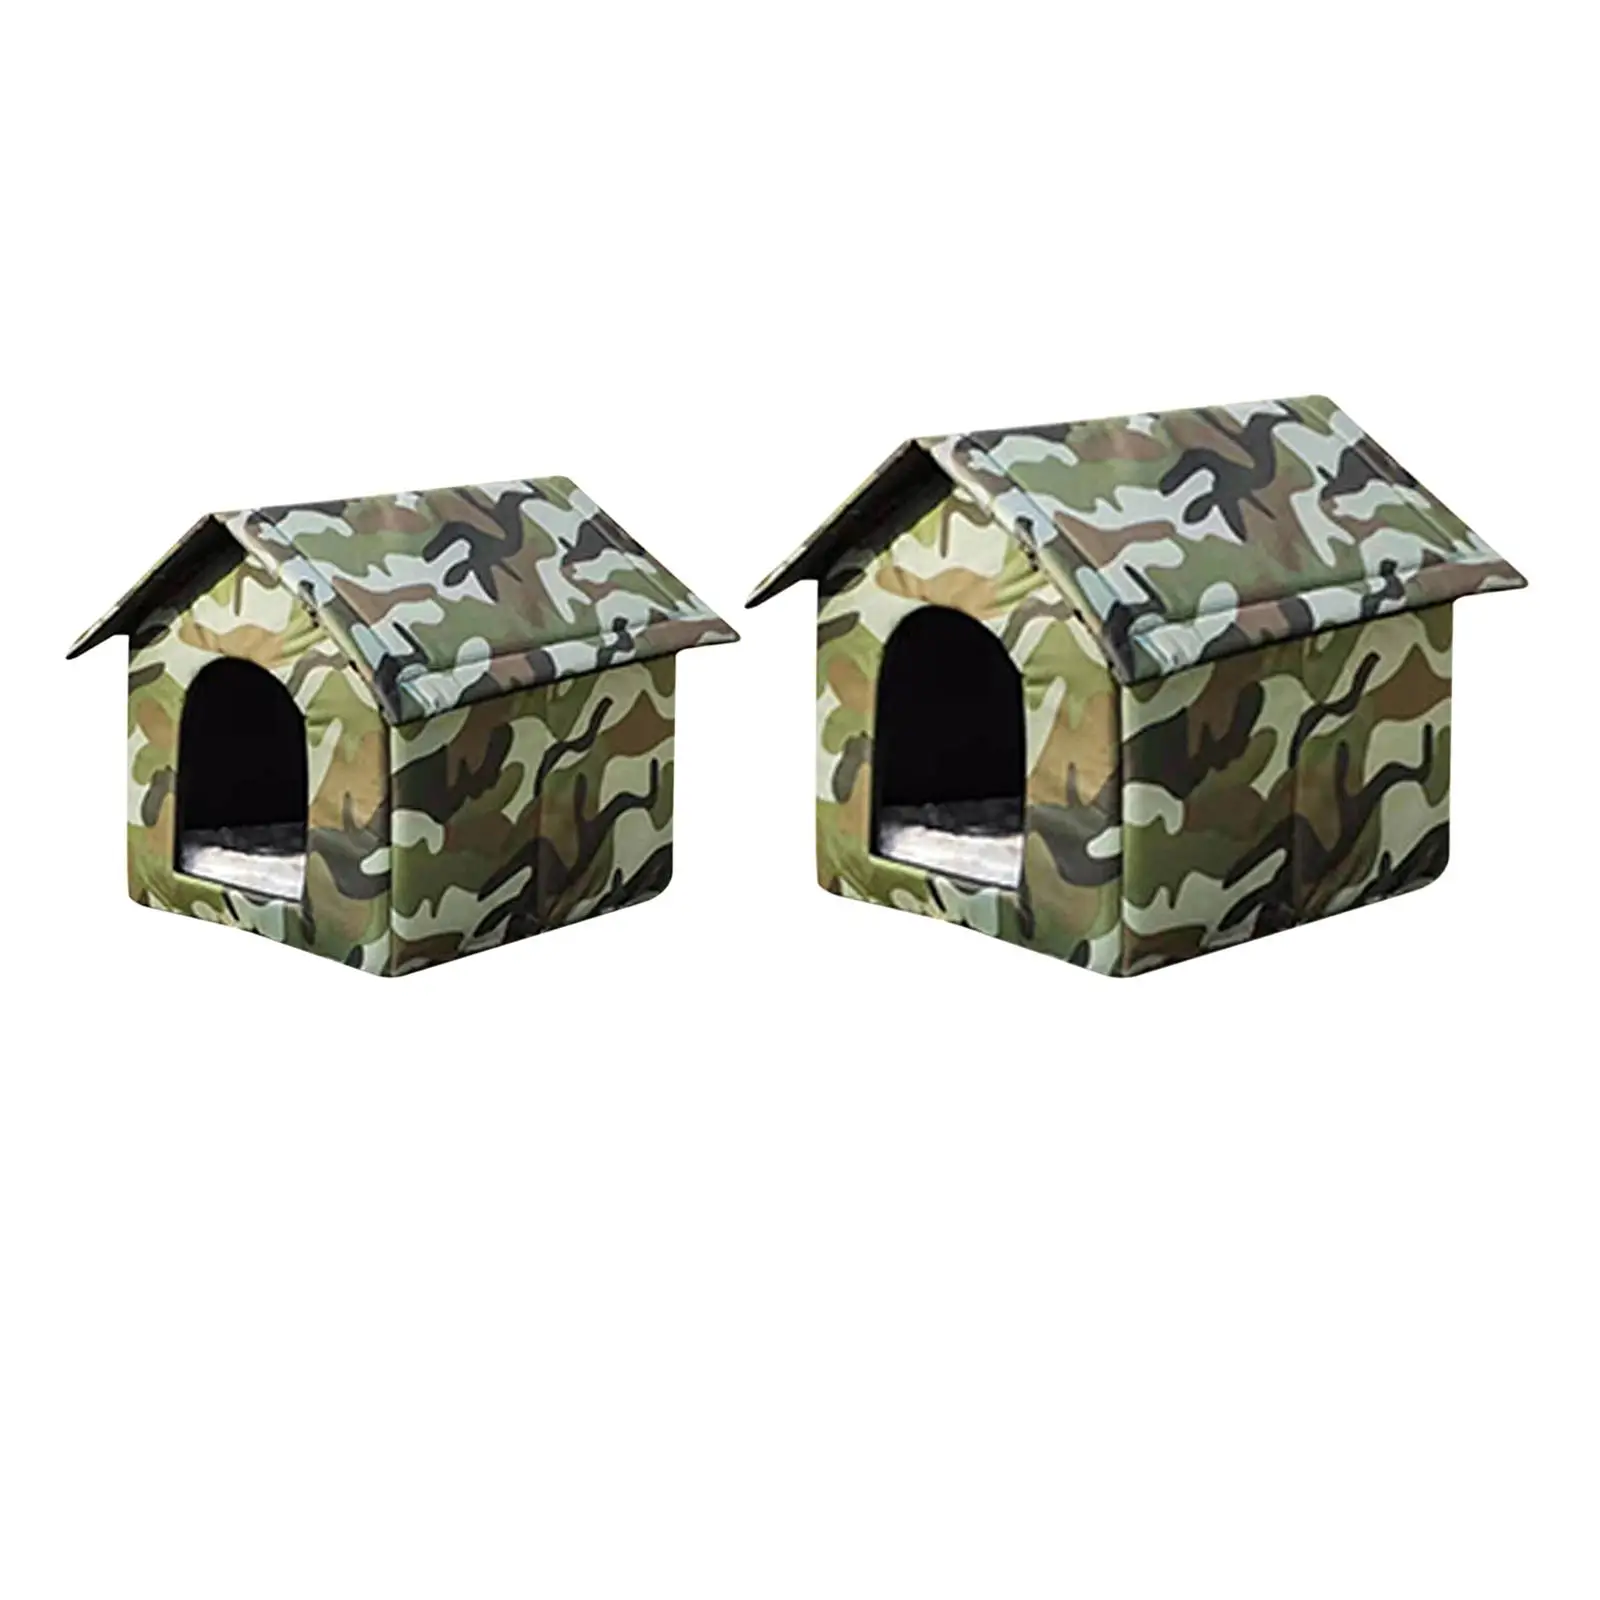 Oxford Cloth Stray Cats Shelter Weatherproof Kennel Bed Puppy Kitten Small Dogs Outdoor Feral Cats Warm House for Indoor Outdoor